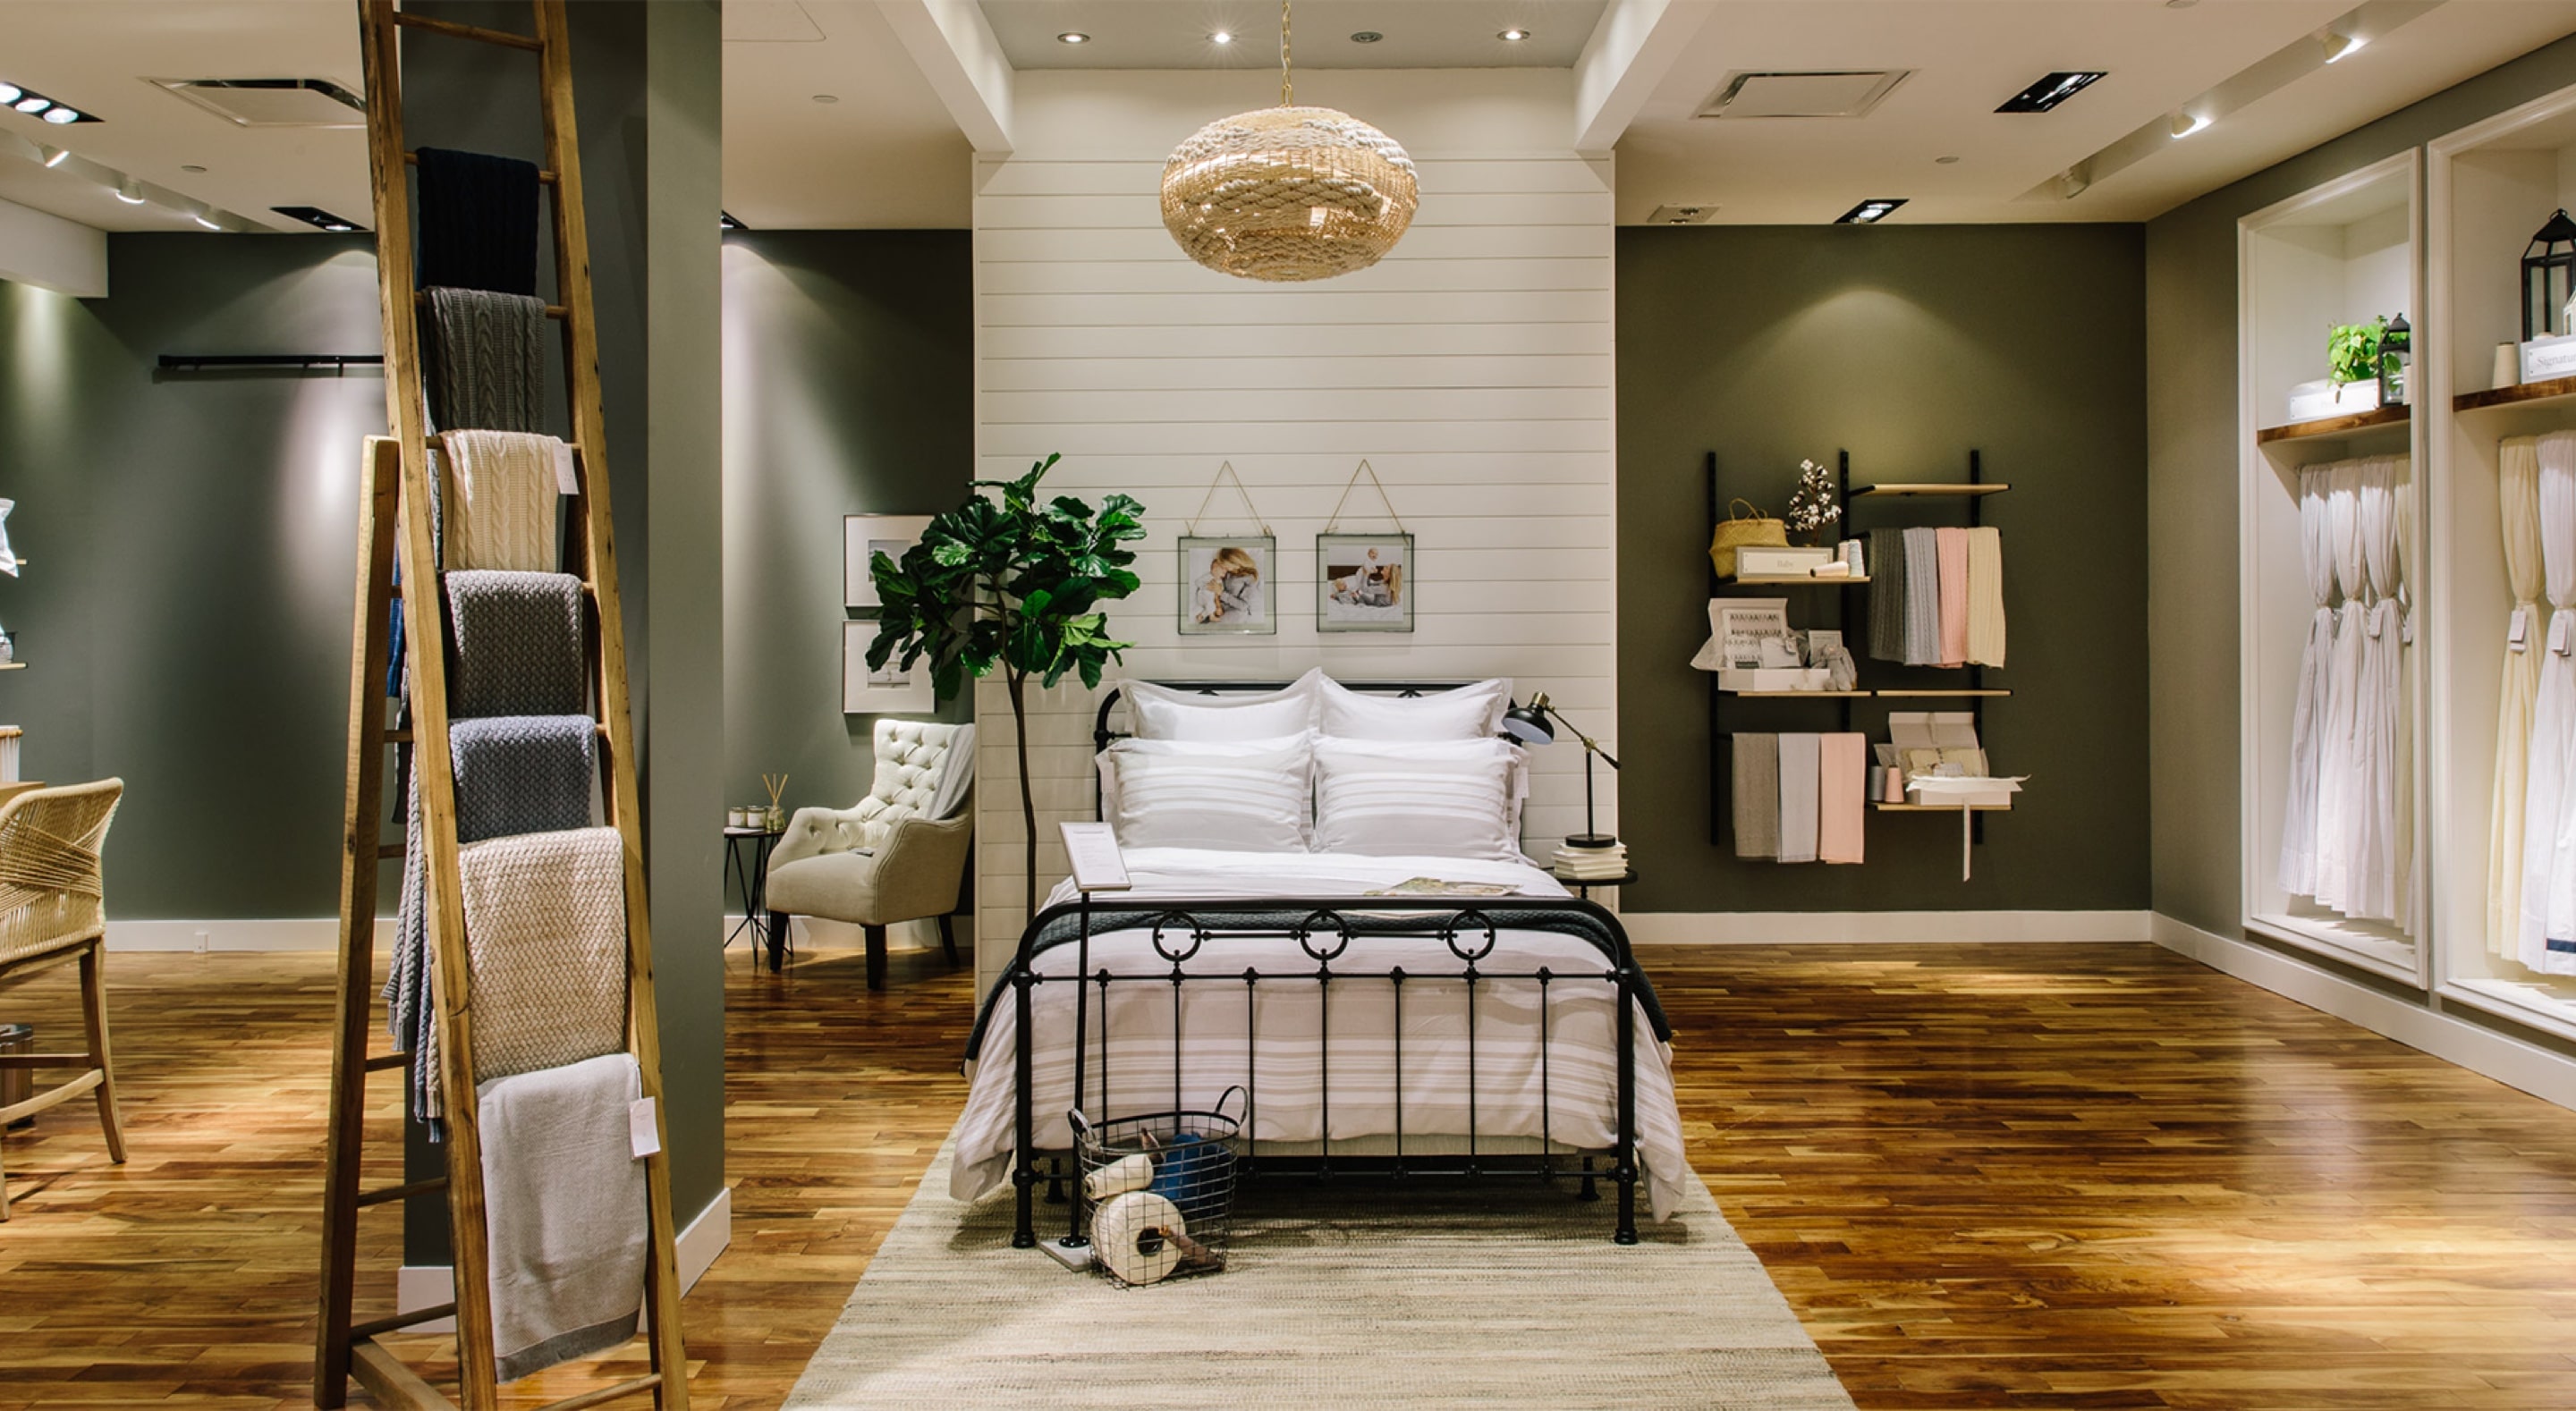 A Boll & Branch showroom, with hardwood floors throughout and a crisply-made bed at center